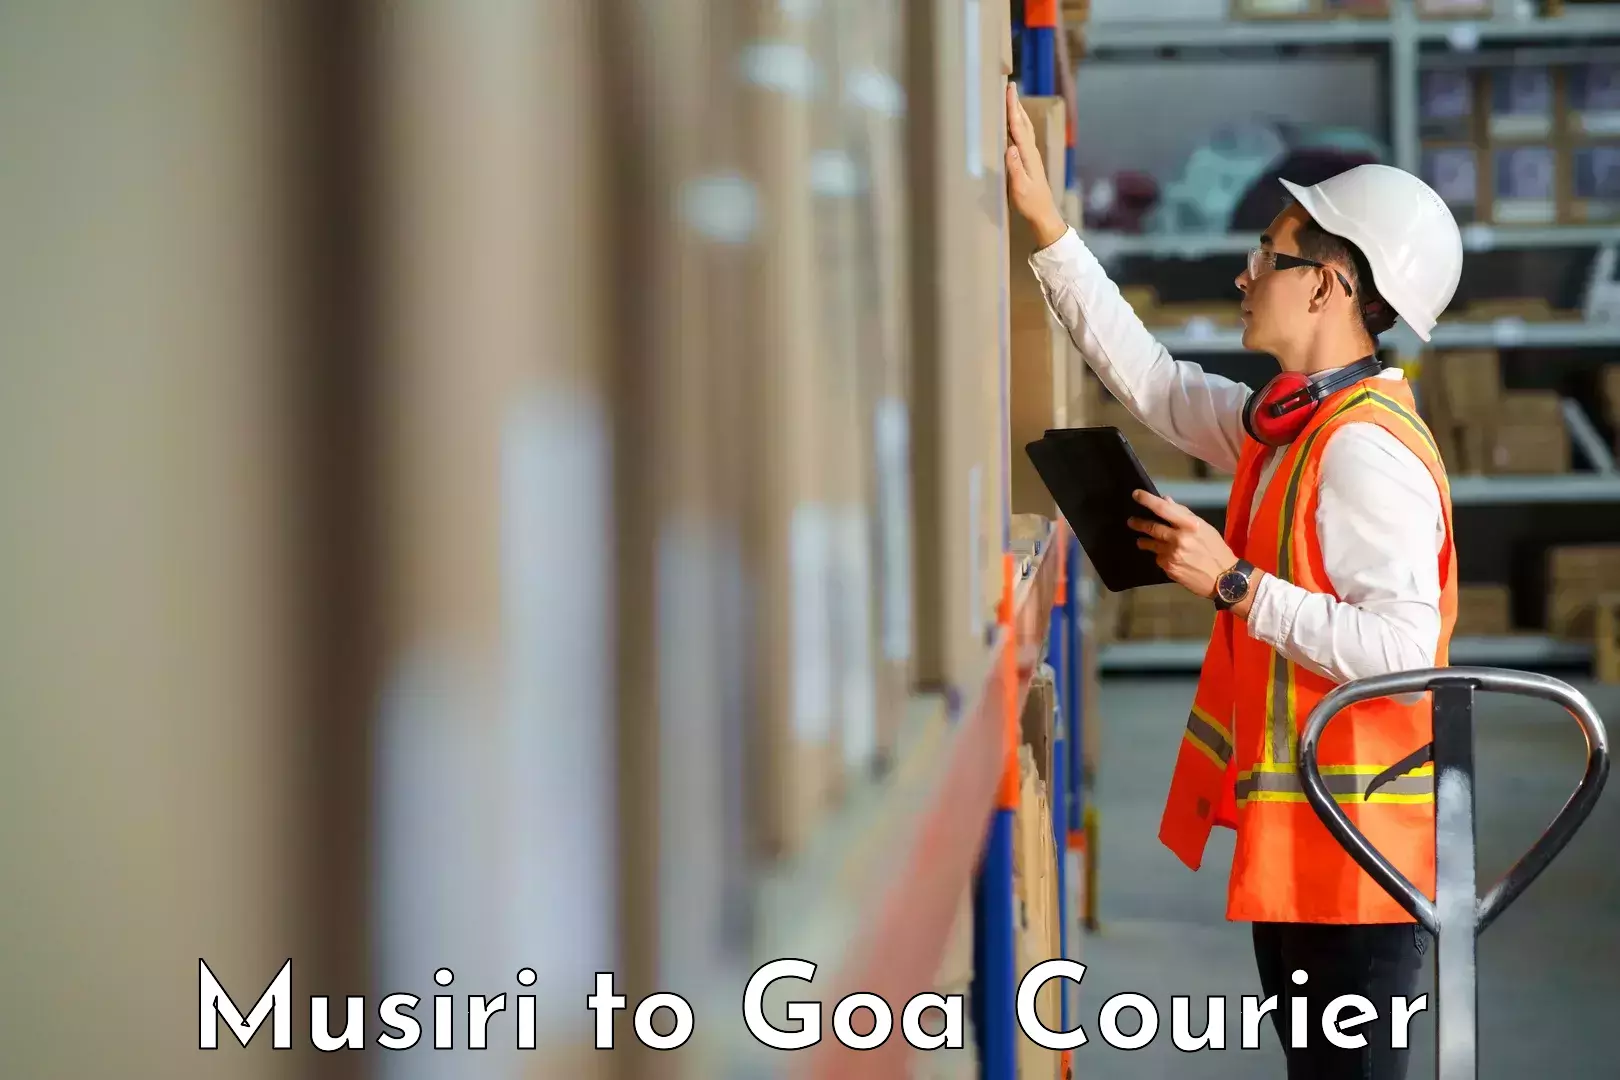 Express delivery network Musiri to Goa